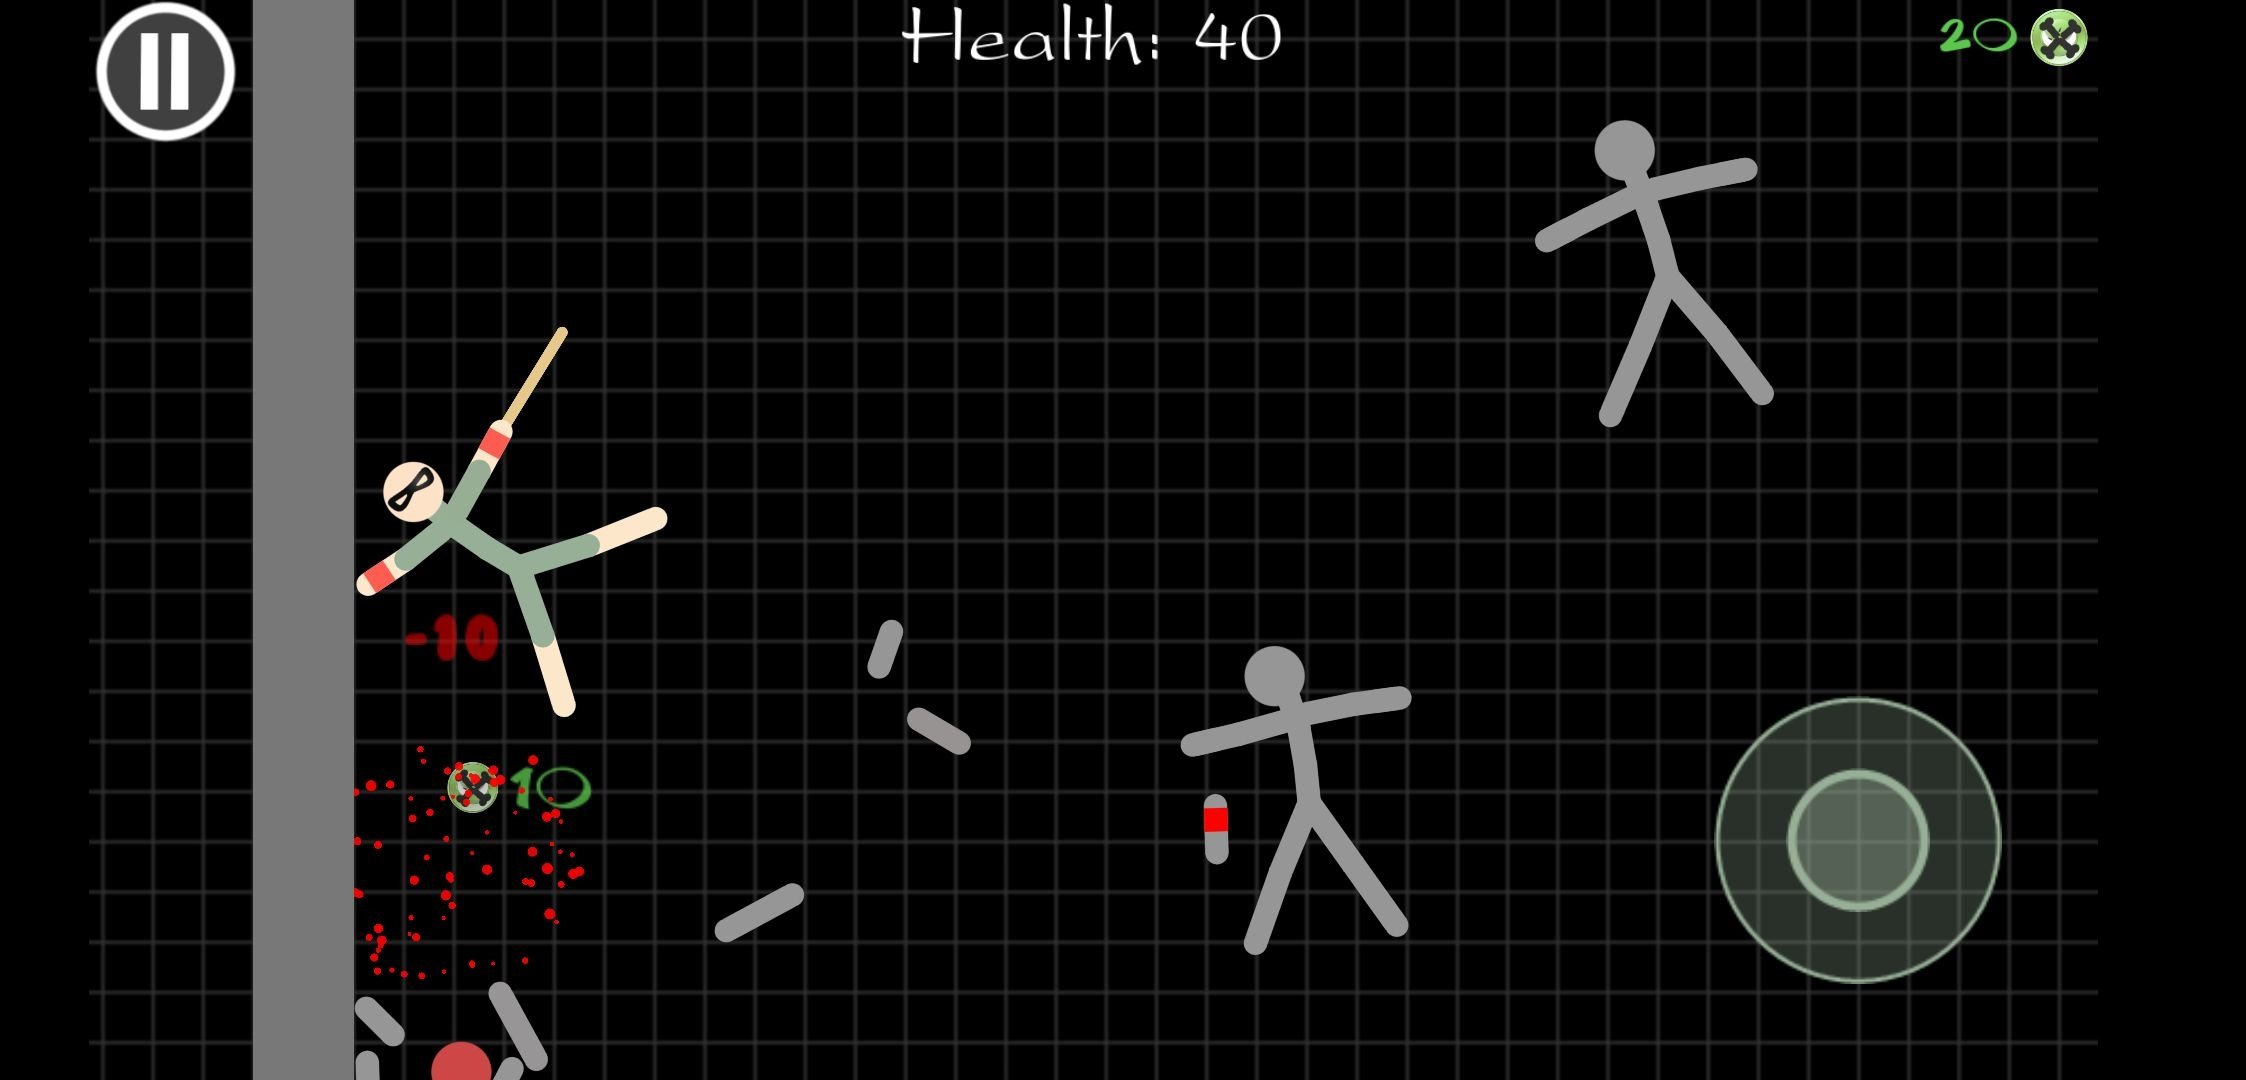 Stickman Warriors App Stats: Downloads, Users and Ranking in Google Play